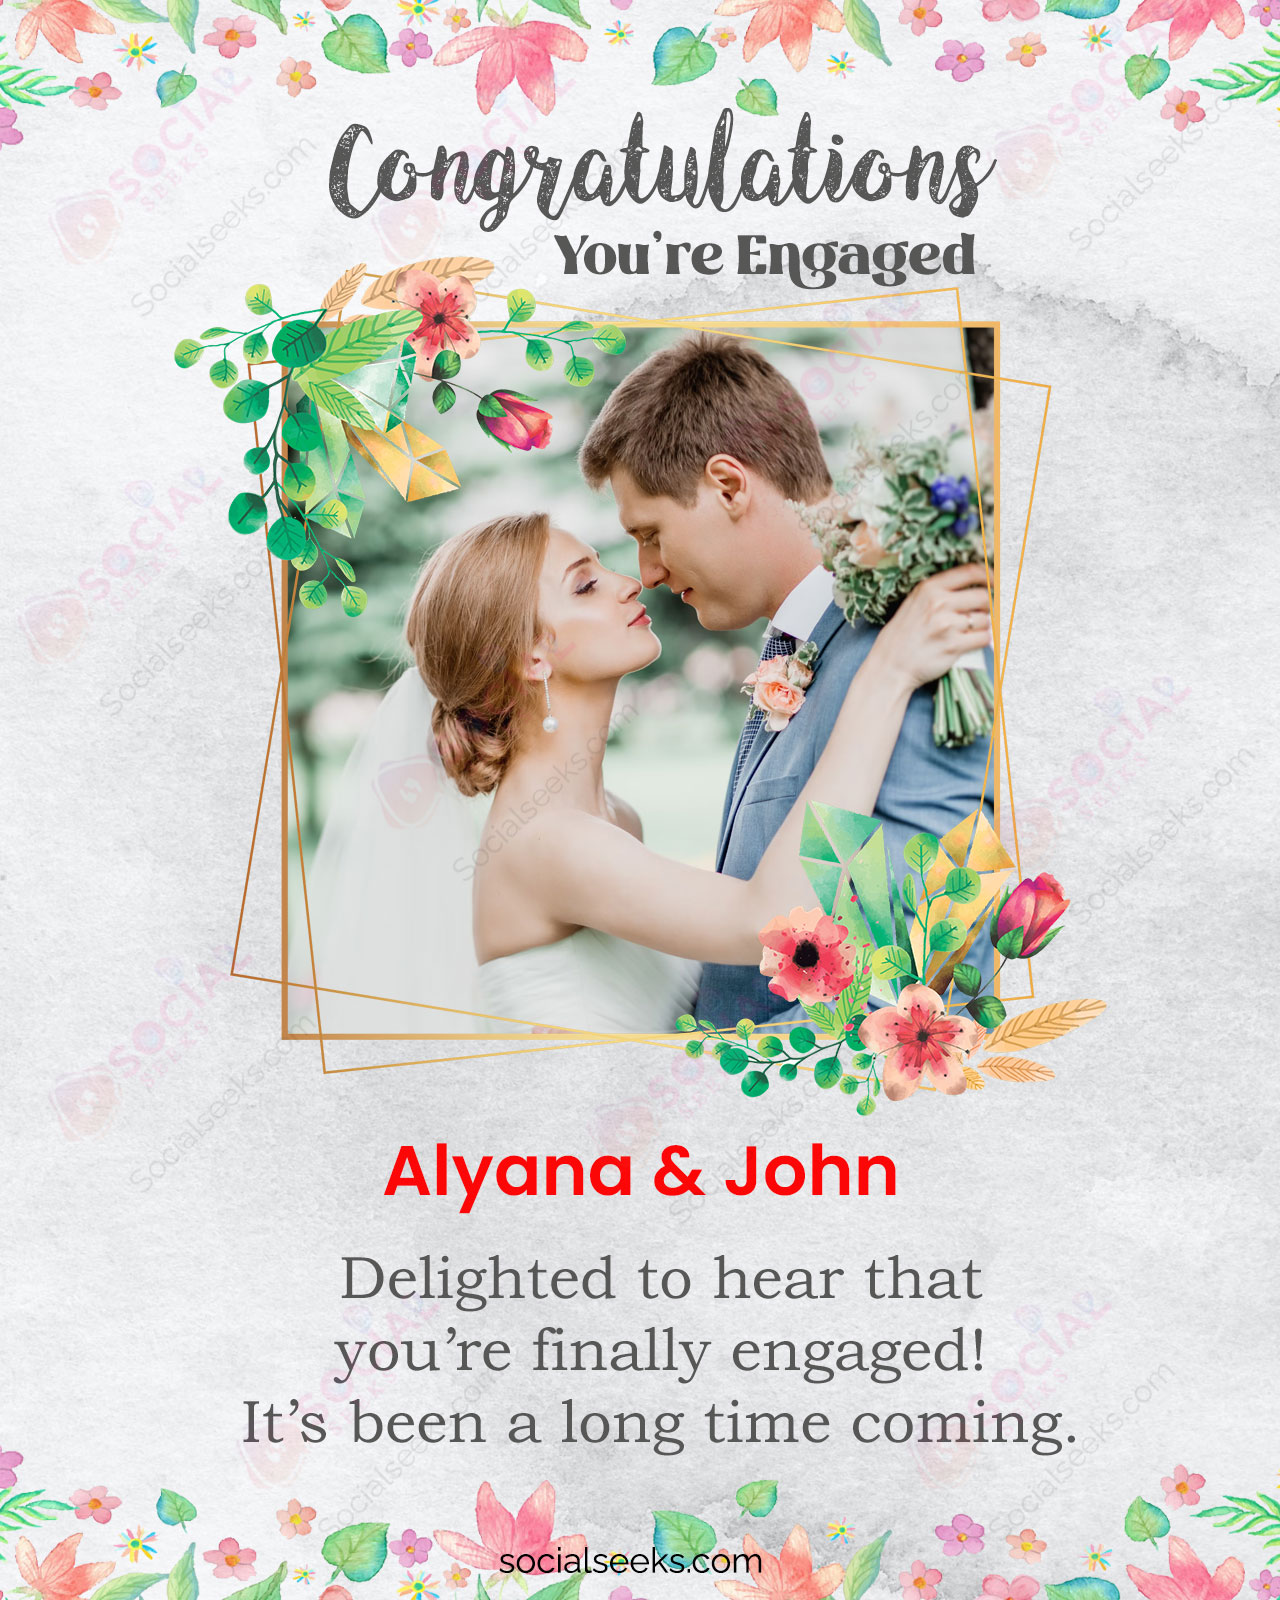 Happy Engagement Photo Wish With Floral Frame Design Greeting Card